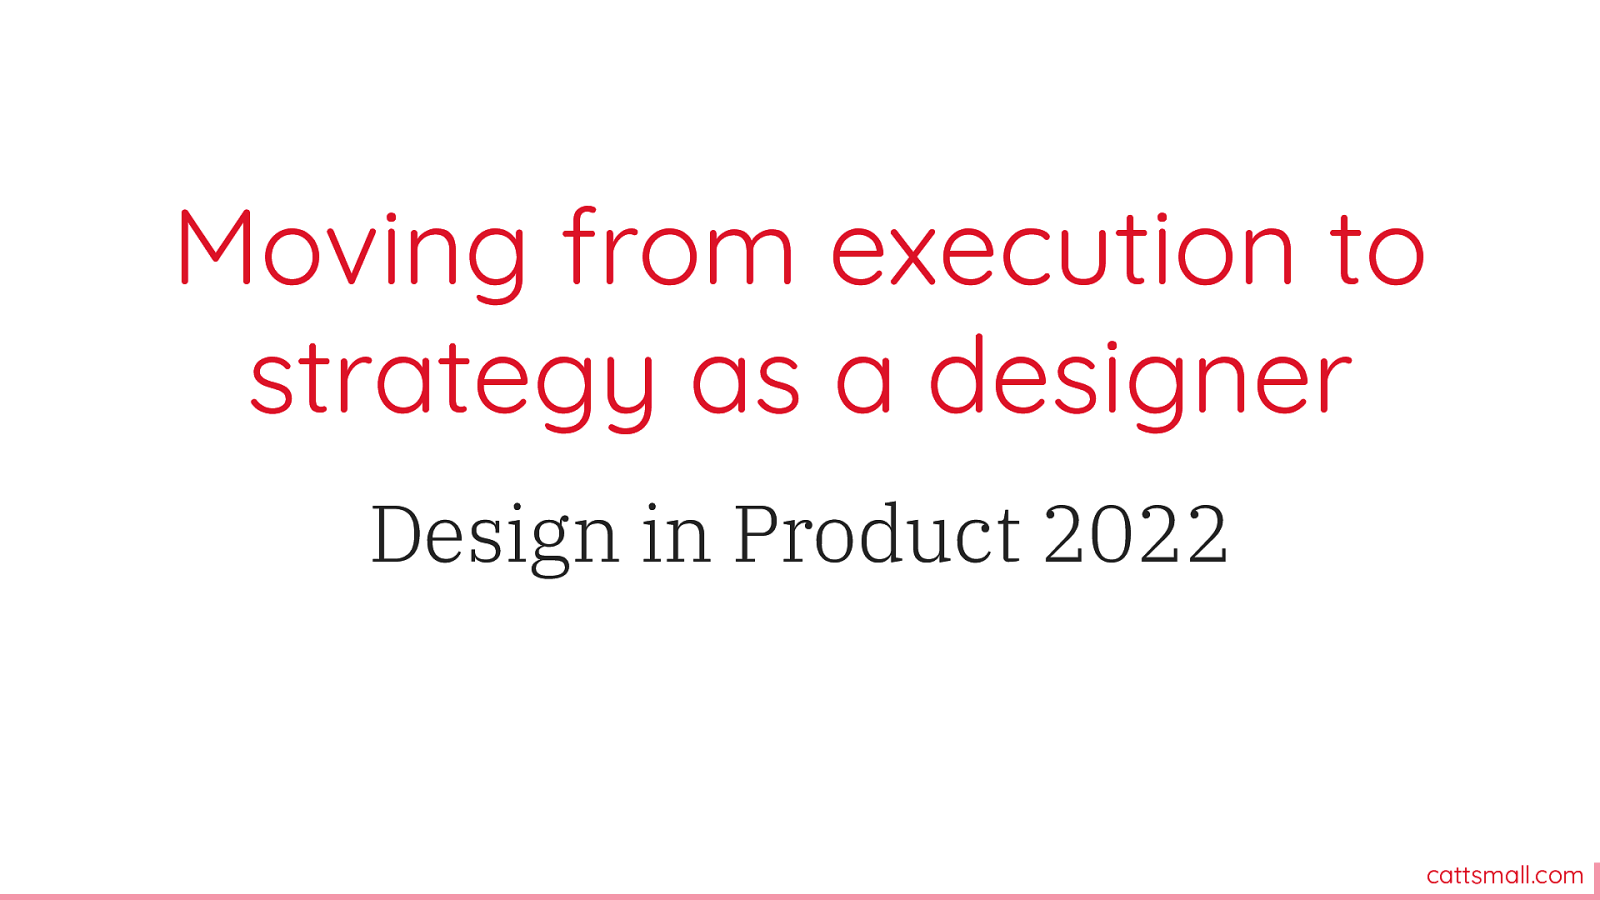 Moving from execution to strategy as a designer